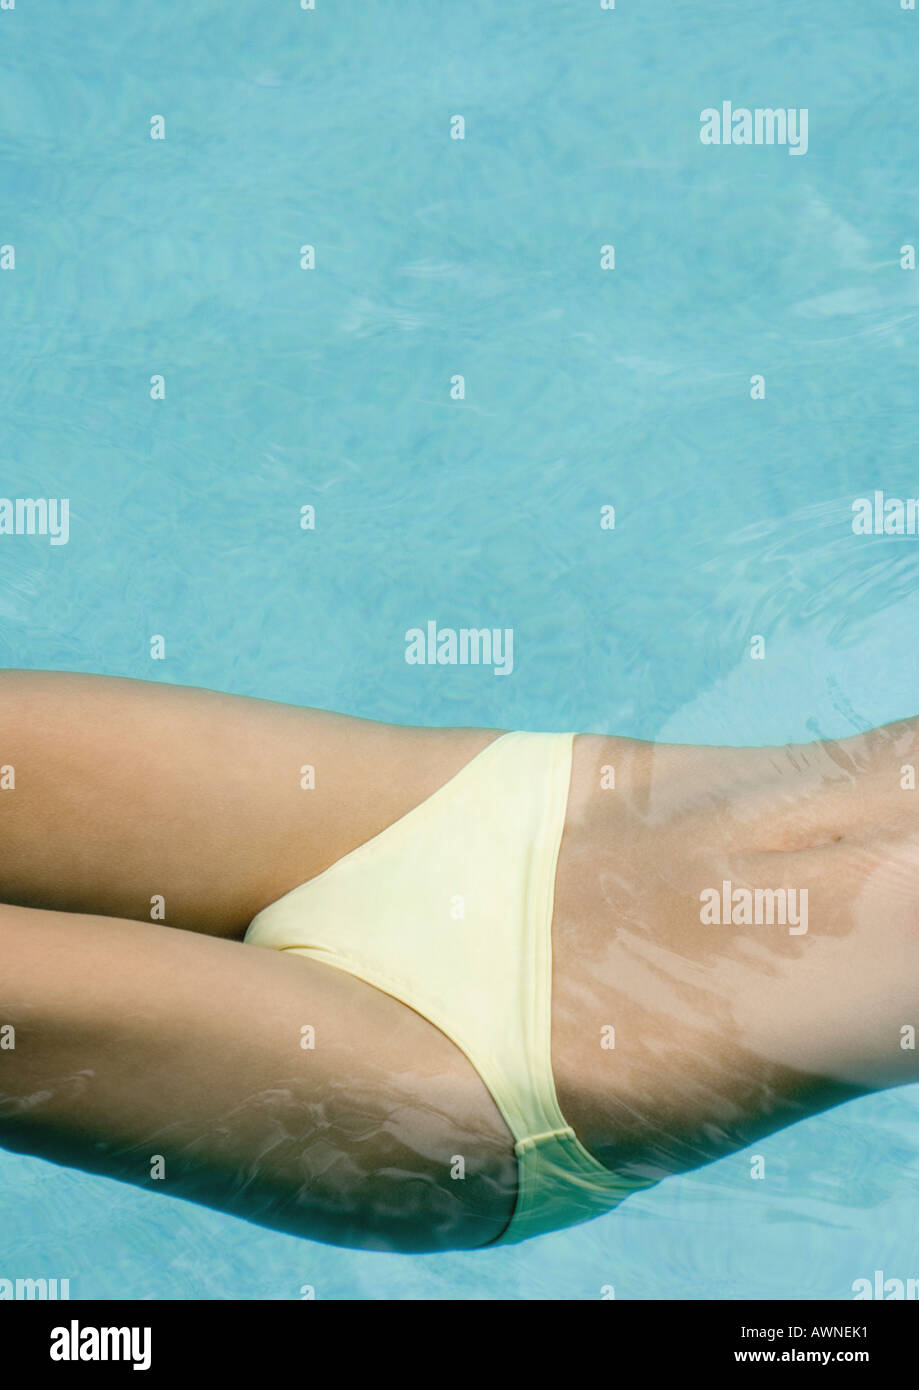 Woman floating in pool, close-up of mid section Stock Photo